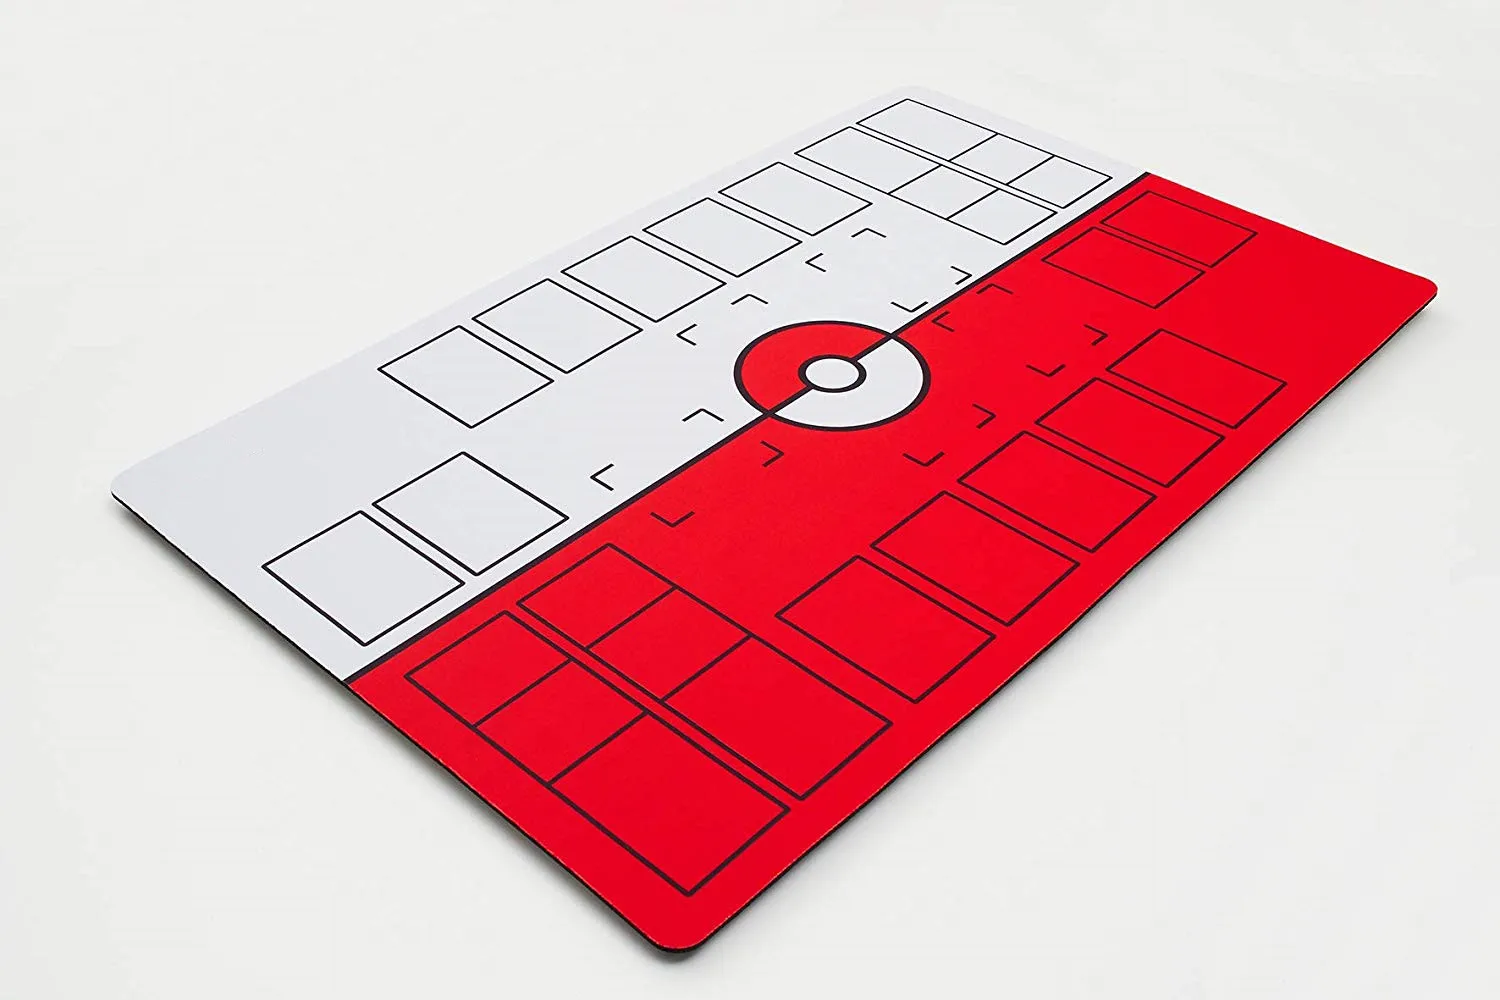 Details about   Pokemon Playmat TCG 2 mat set Fabric Stadium Water Rubber backed Card Game 